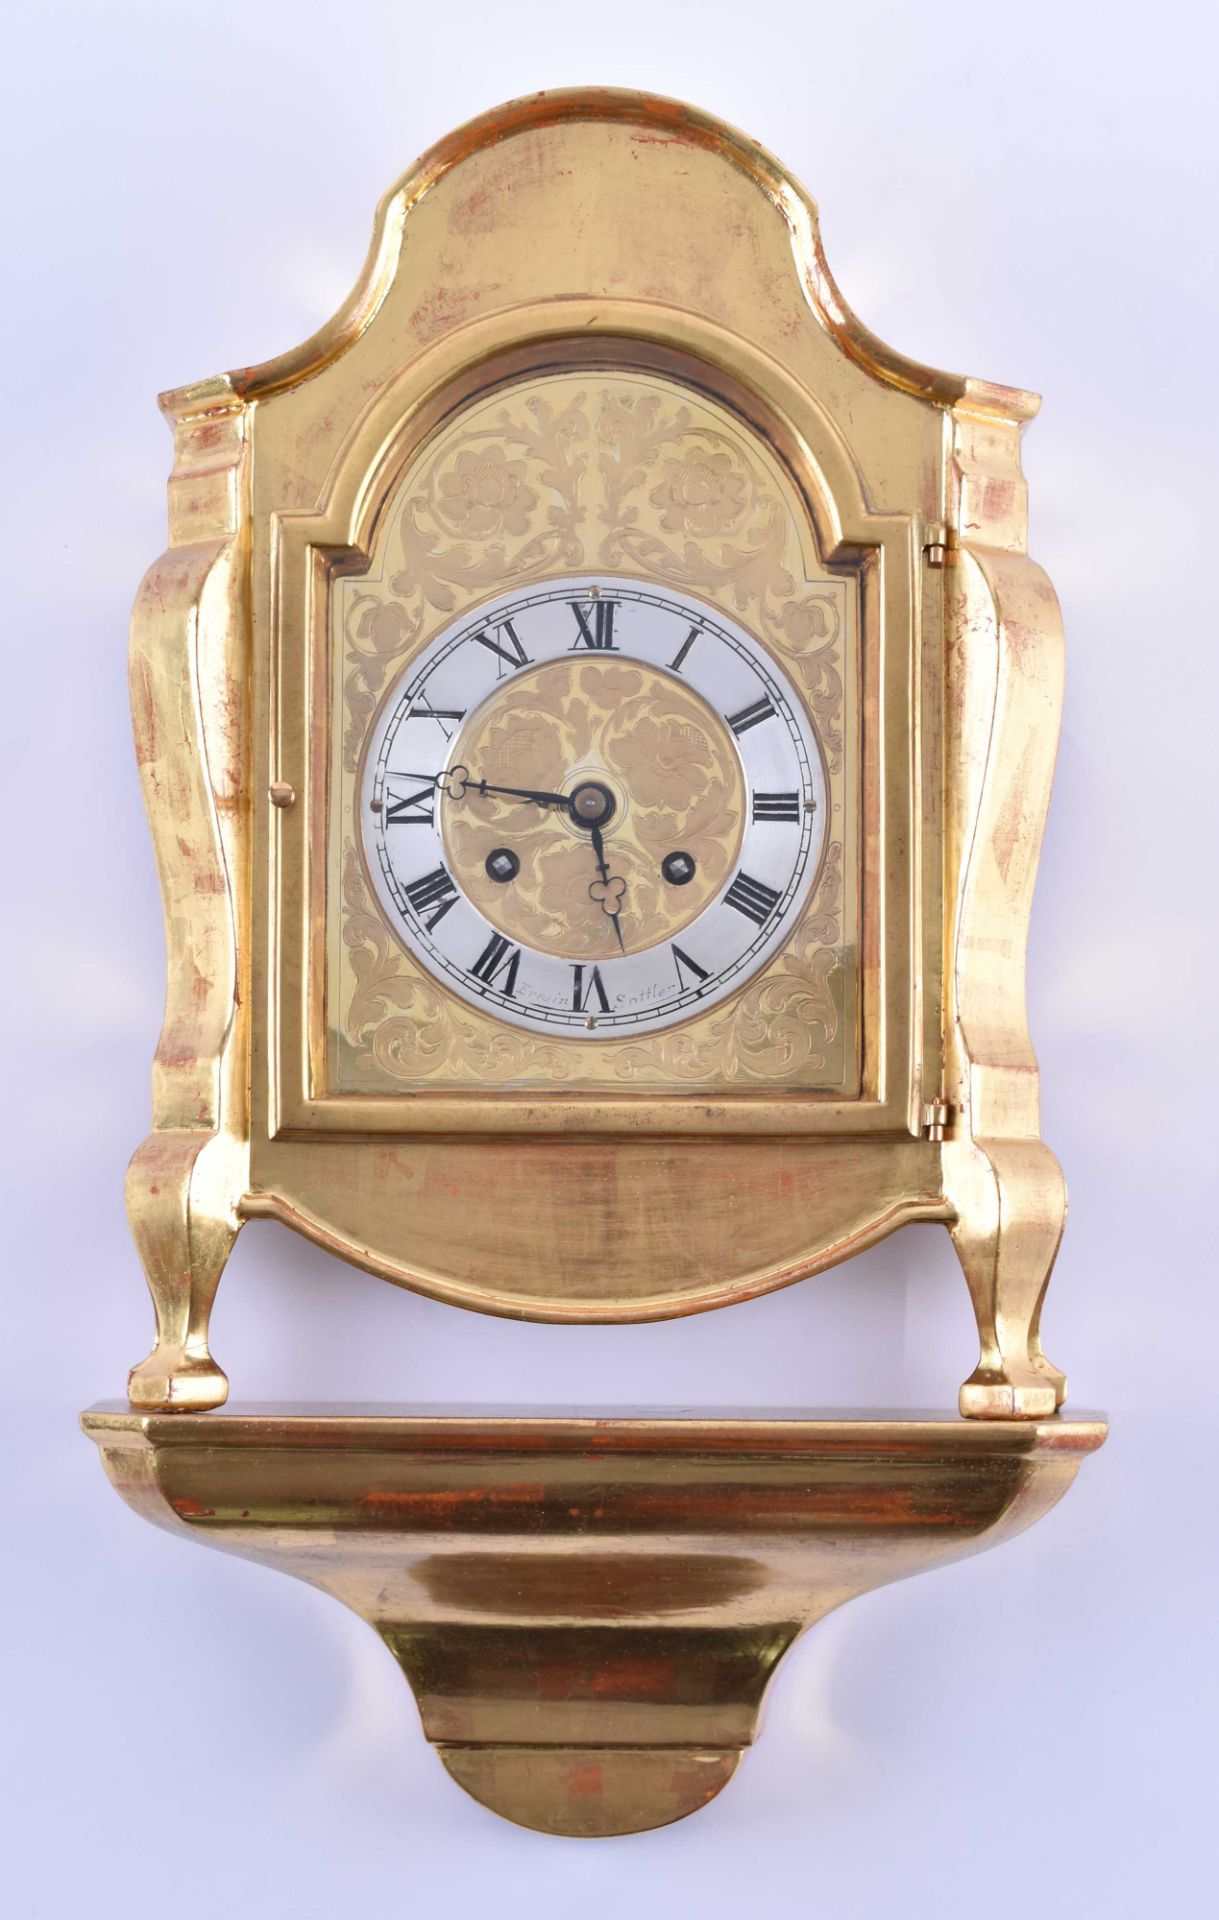 Table clock Erwin Sattlersmall fireplace clock with wall platform, height: without platform 26.5